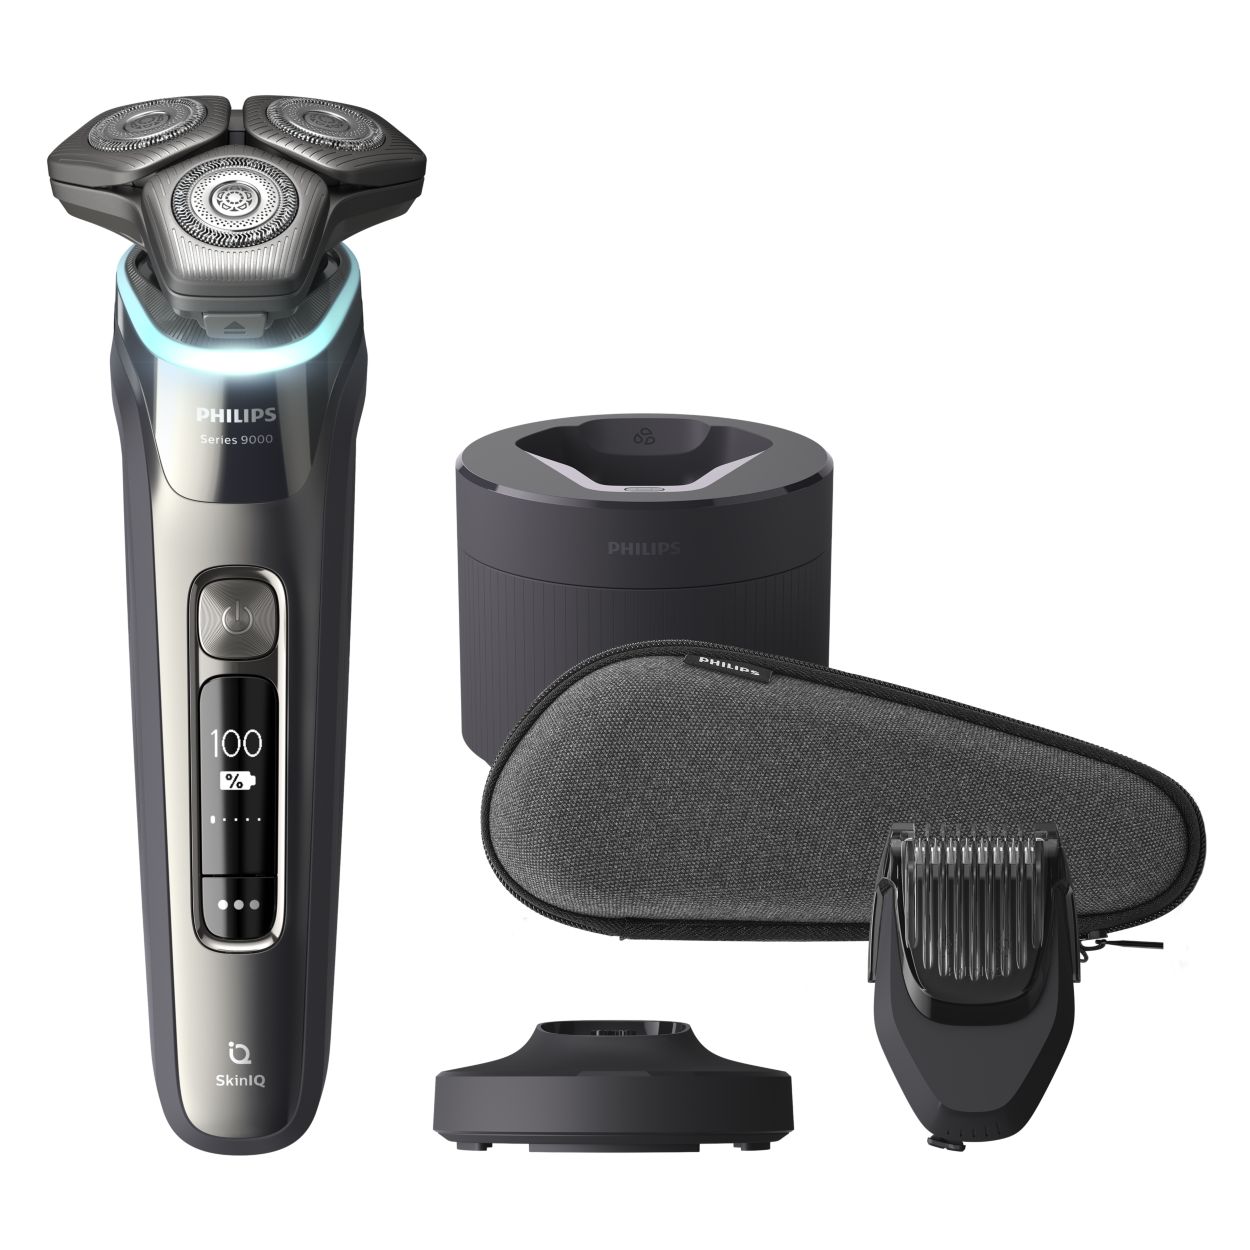 Shaver Series 9000 Wet And Dry Electric Shaver S9987 68 Philips